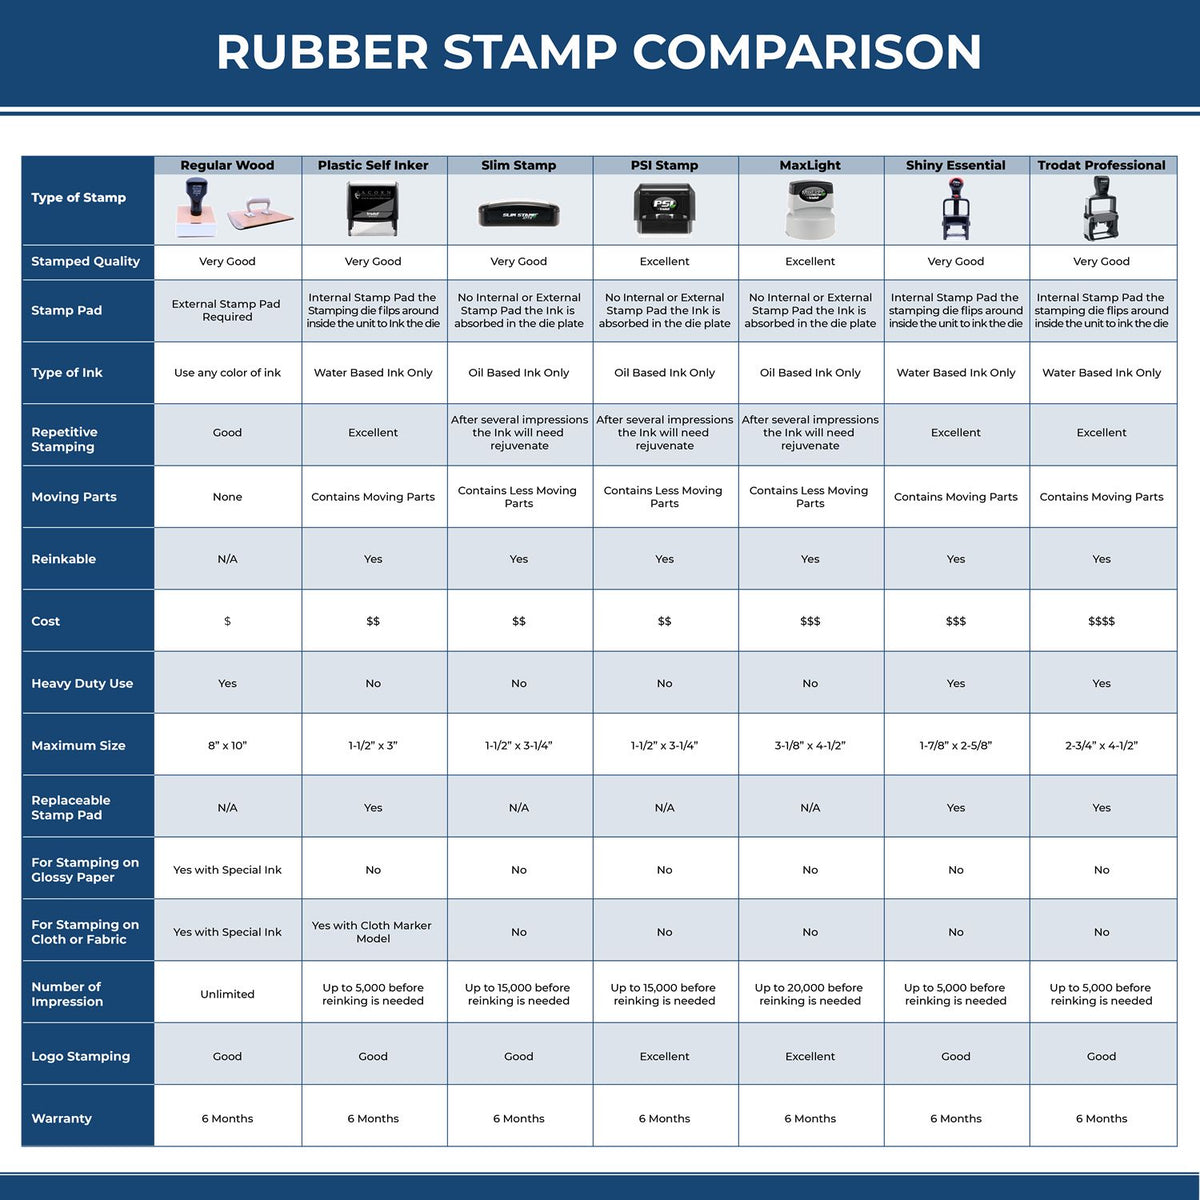 Large Temporarily Away Rubber Stamp 5582R Rubber Stamp Comparison